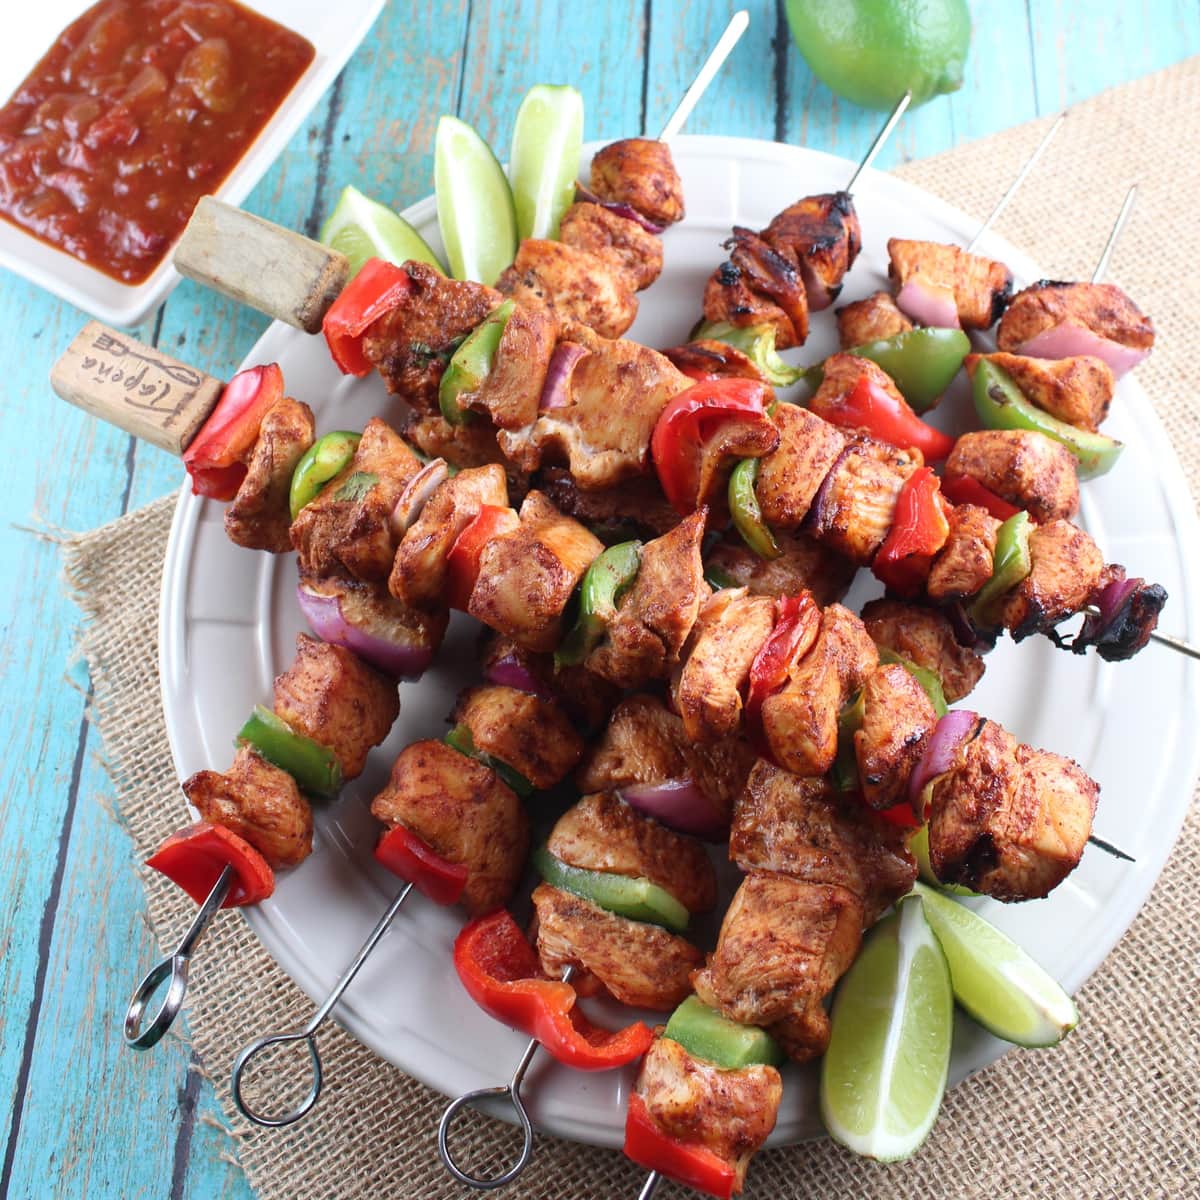 Grilled chicken fajita skewers on plate with lime wedges